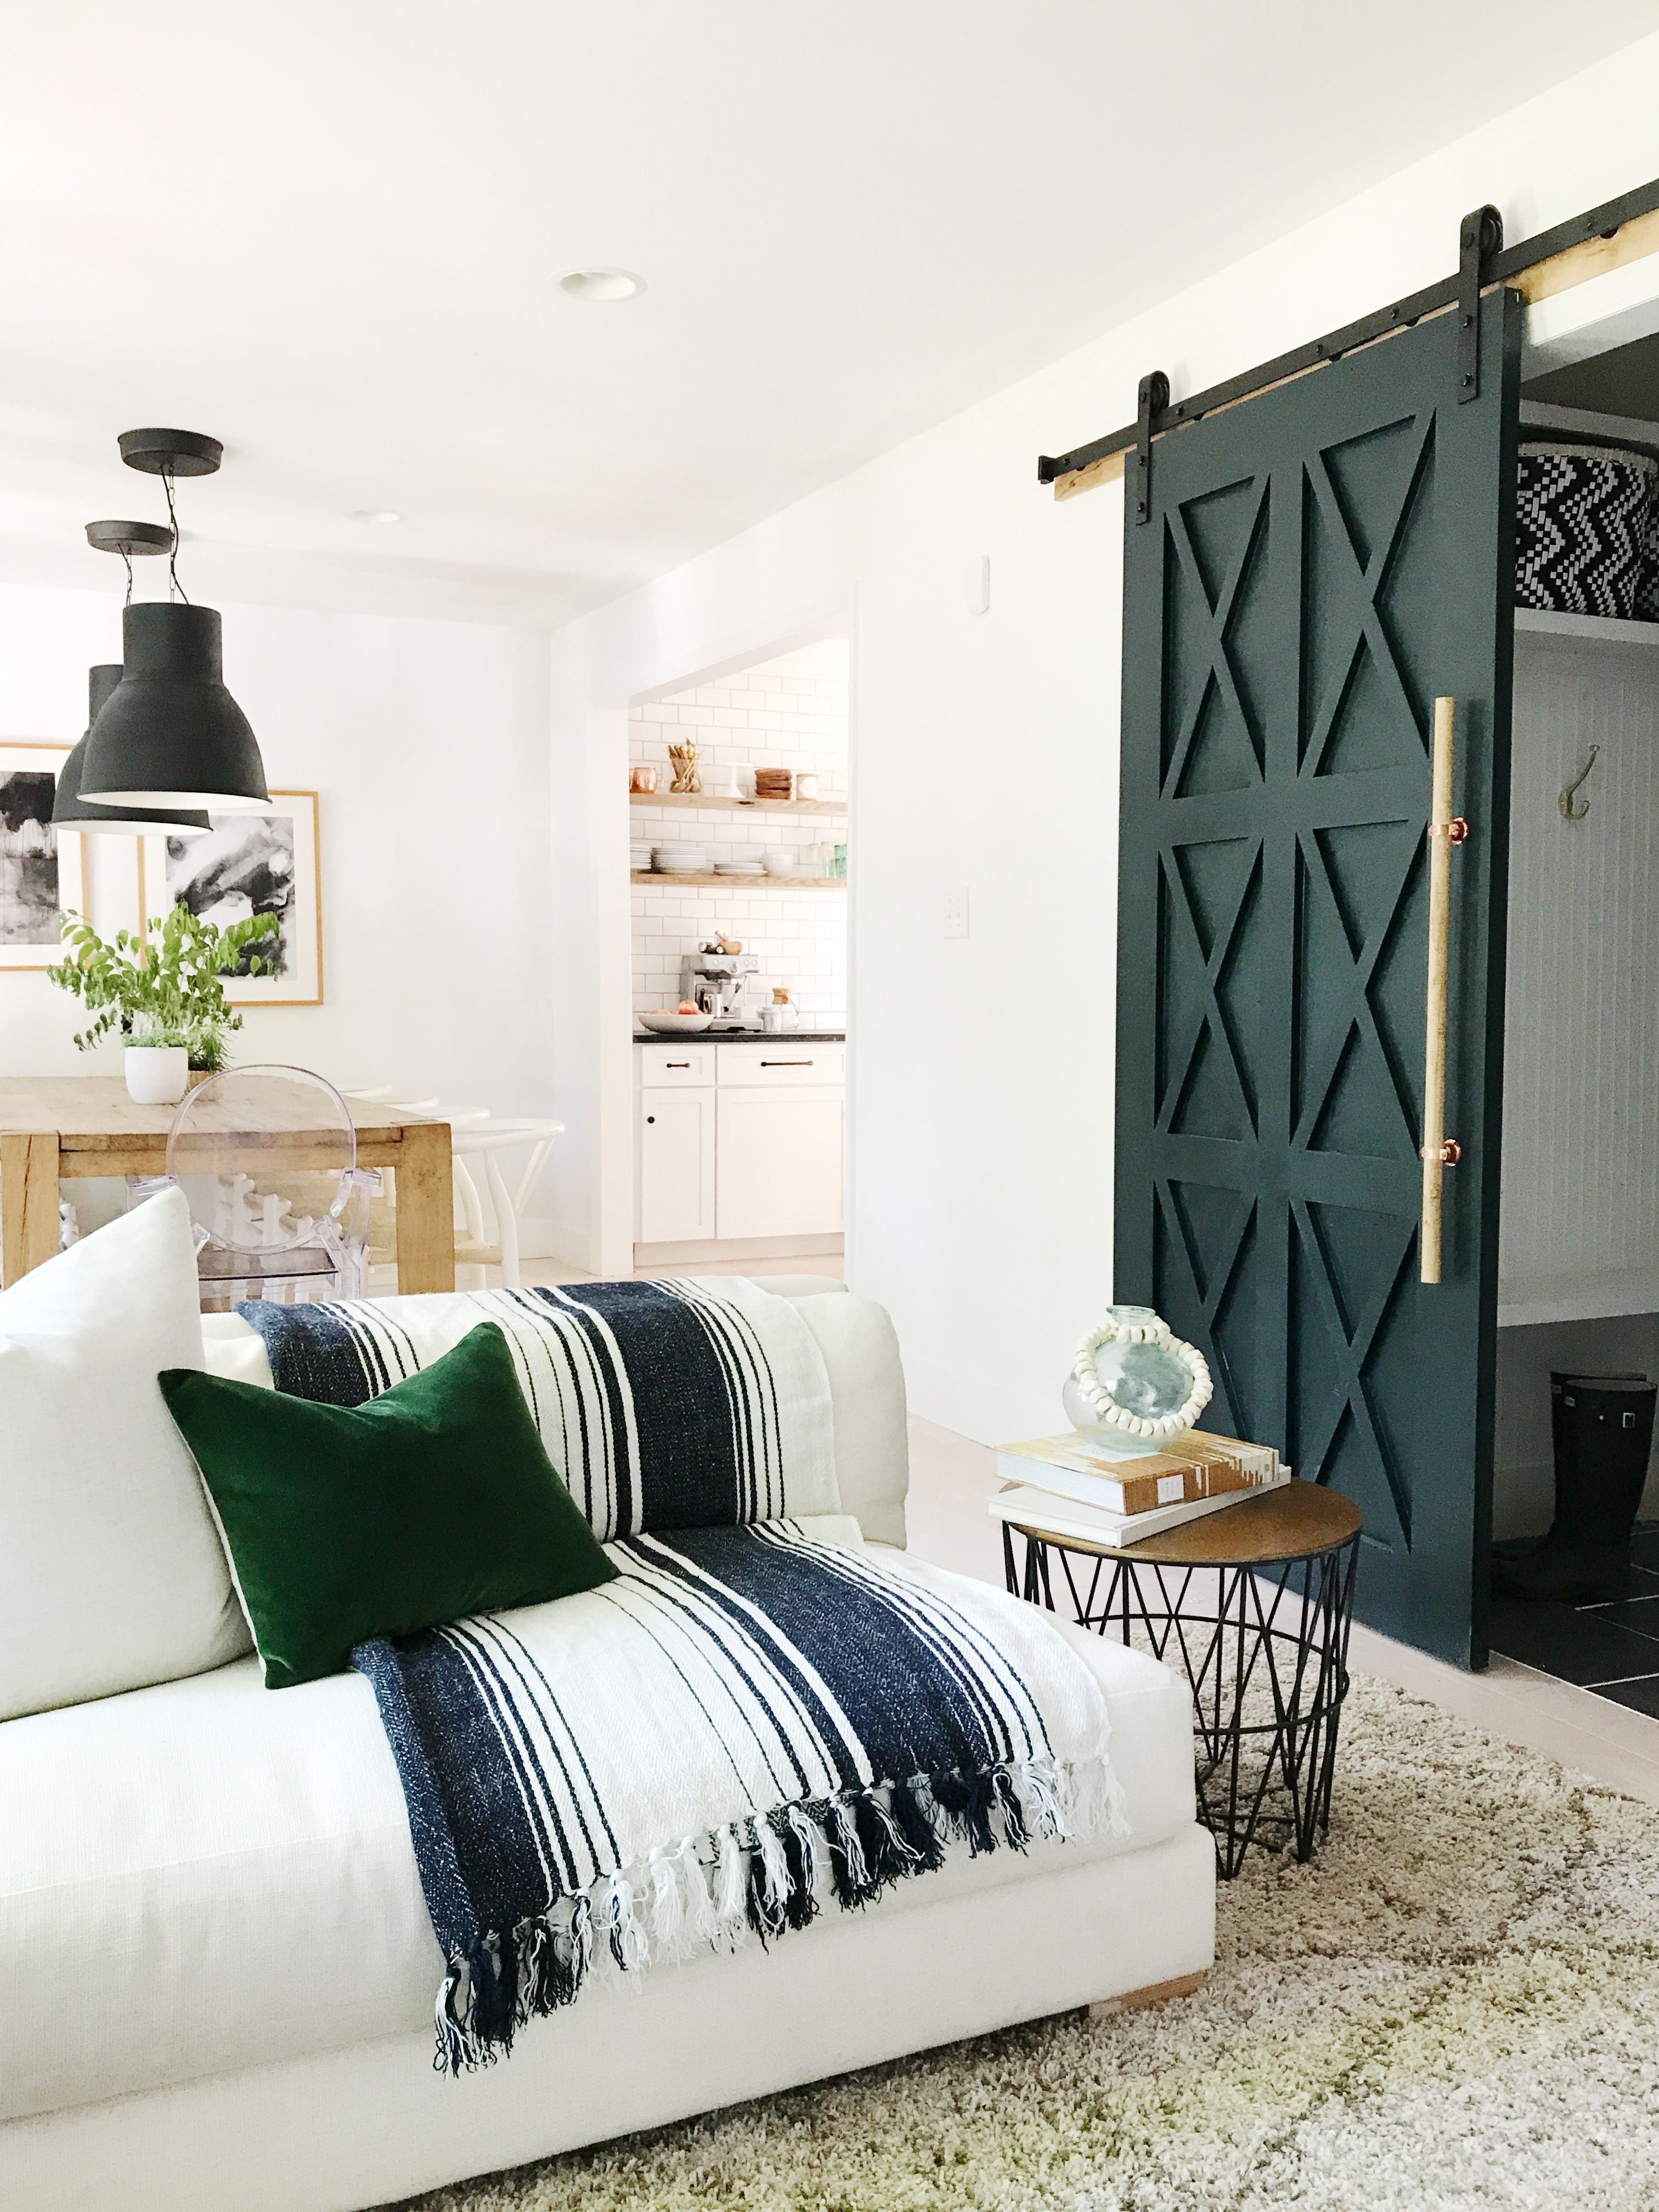 Chic Barn Door Ideas To Add To Your Home No Vacancy